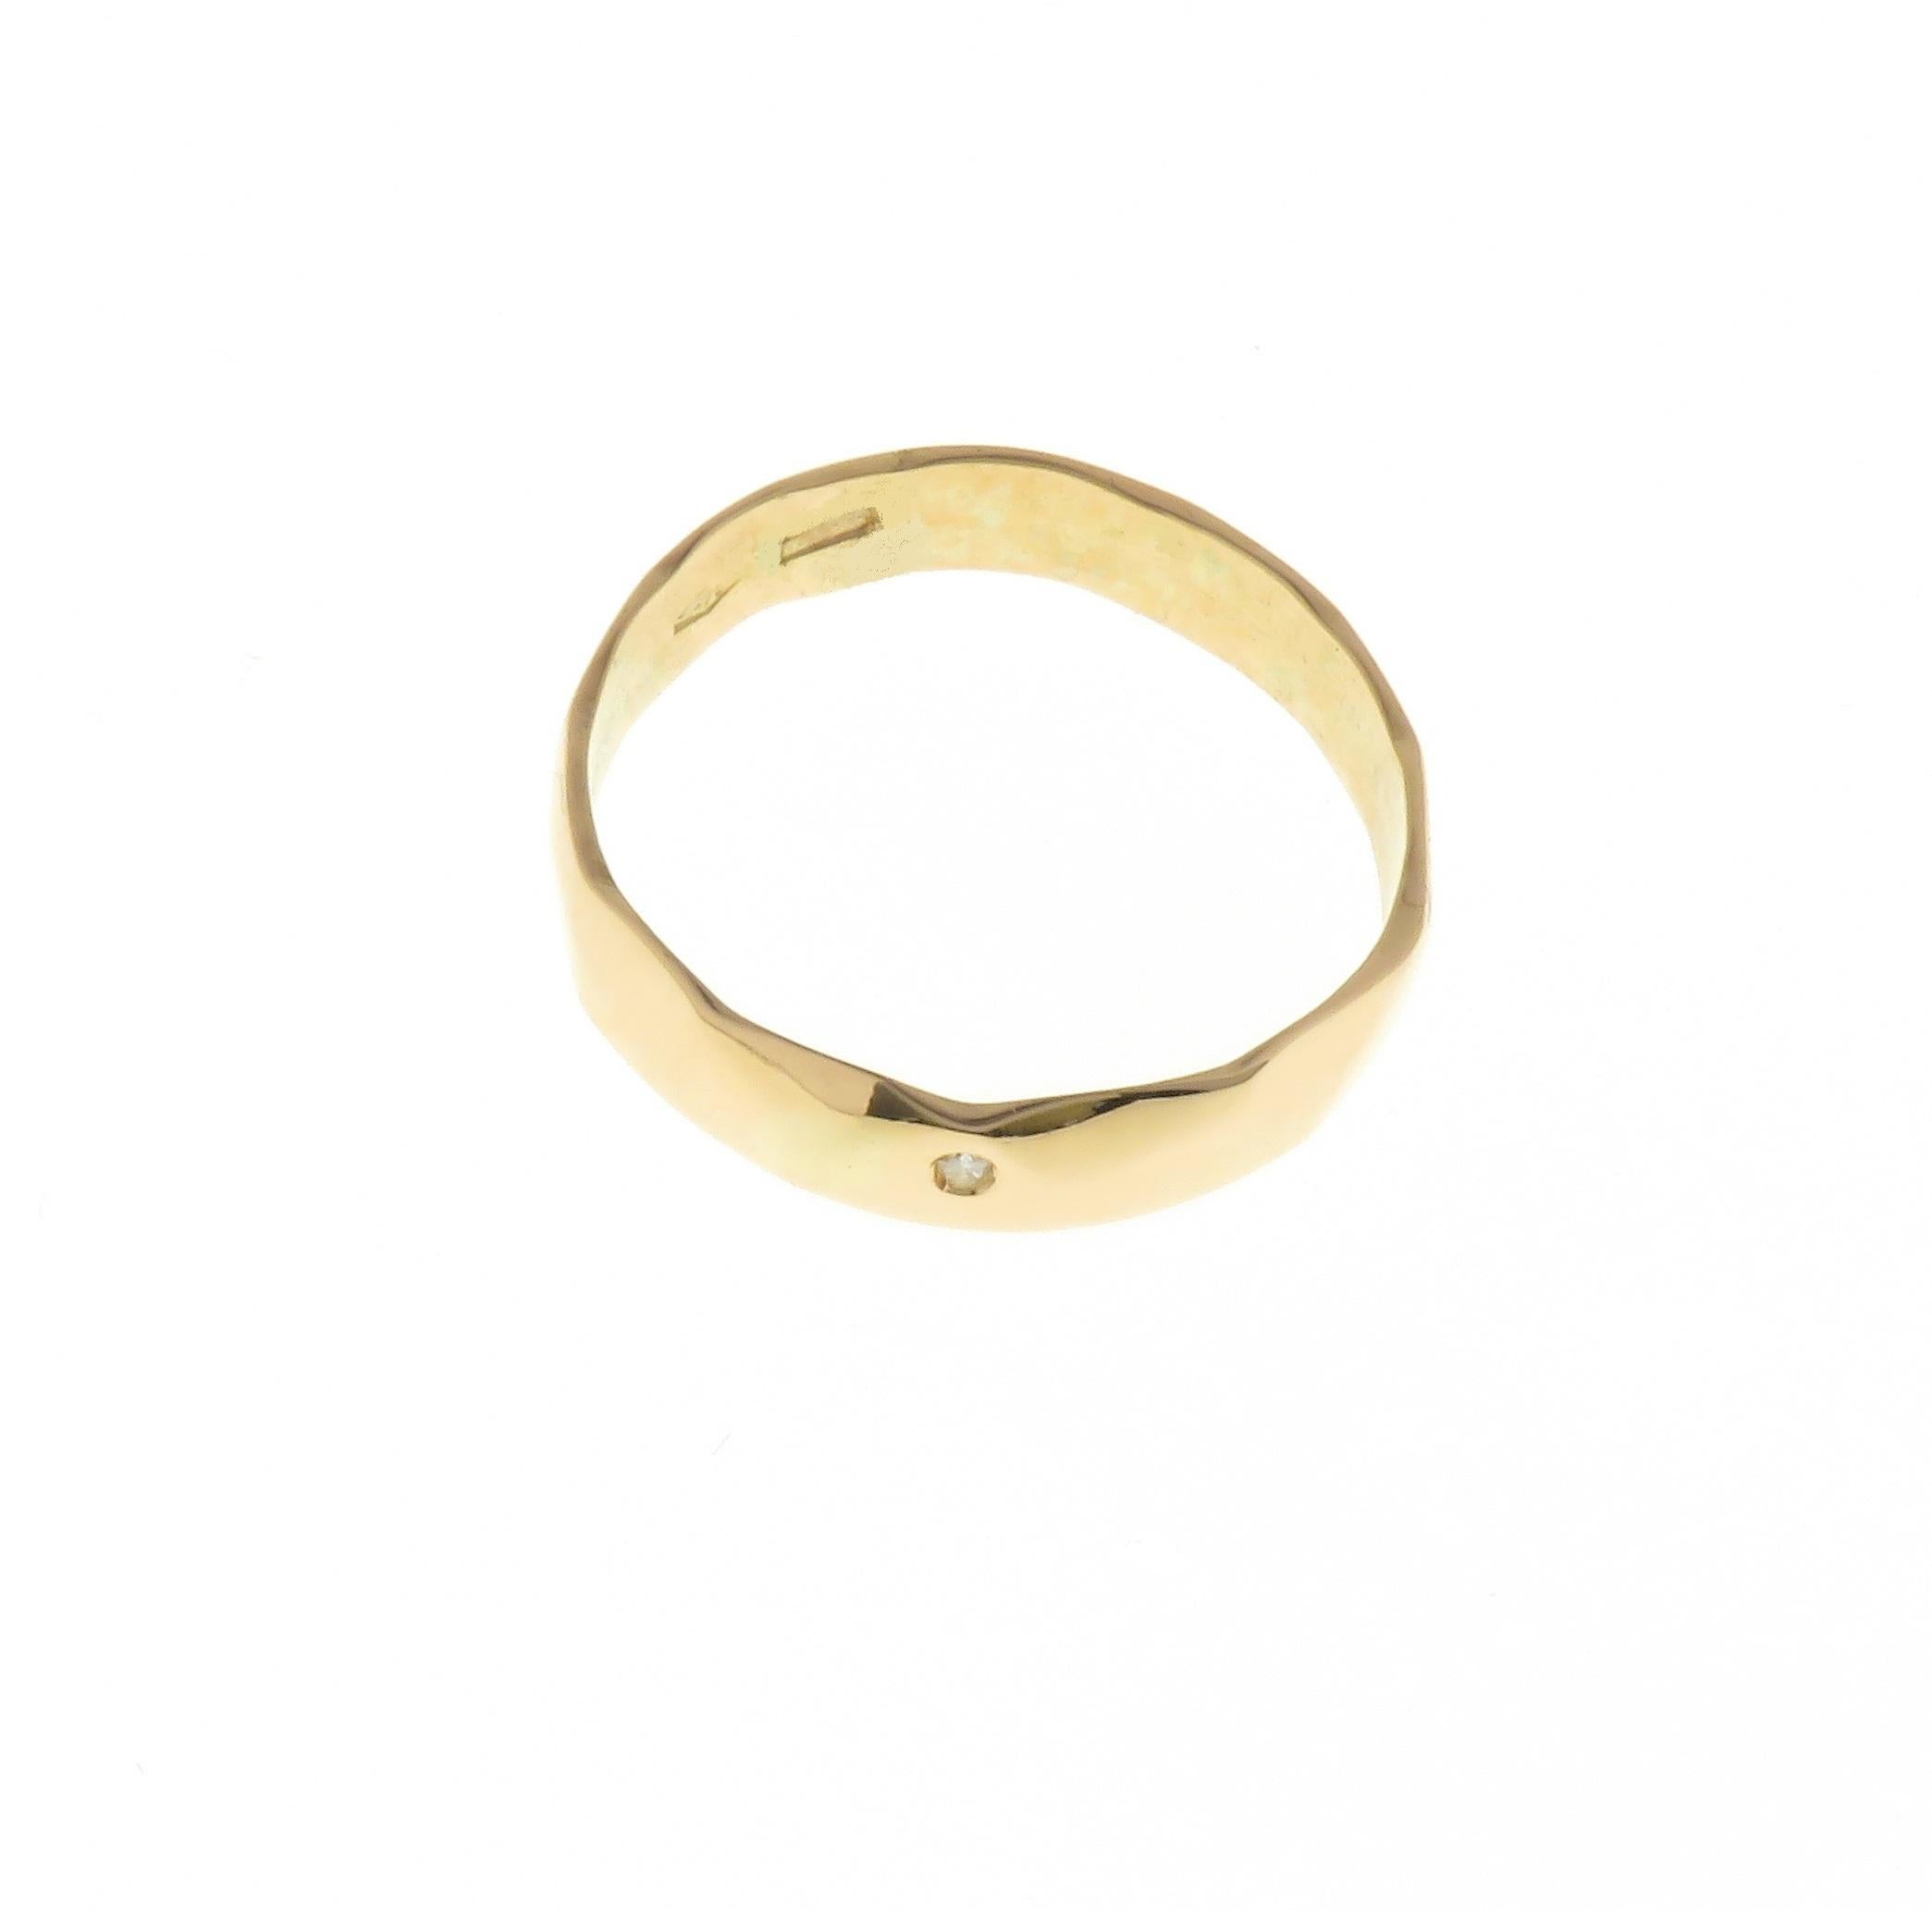 Contemporary Diamond 9 Karat Rose Gold Hammered Ring Handcrafted in Italy